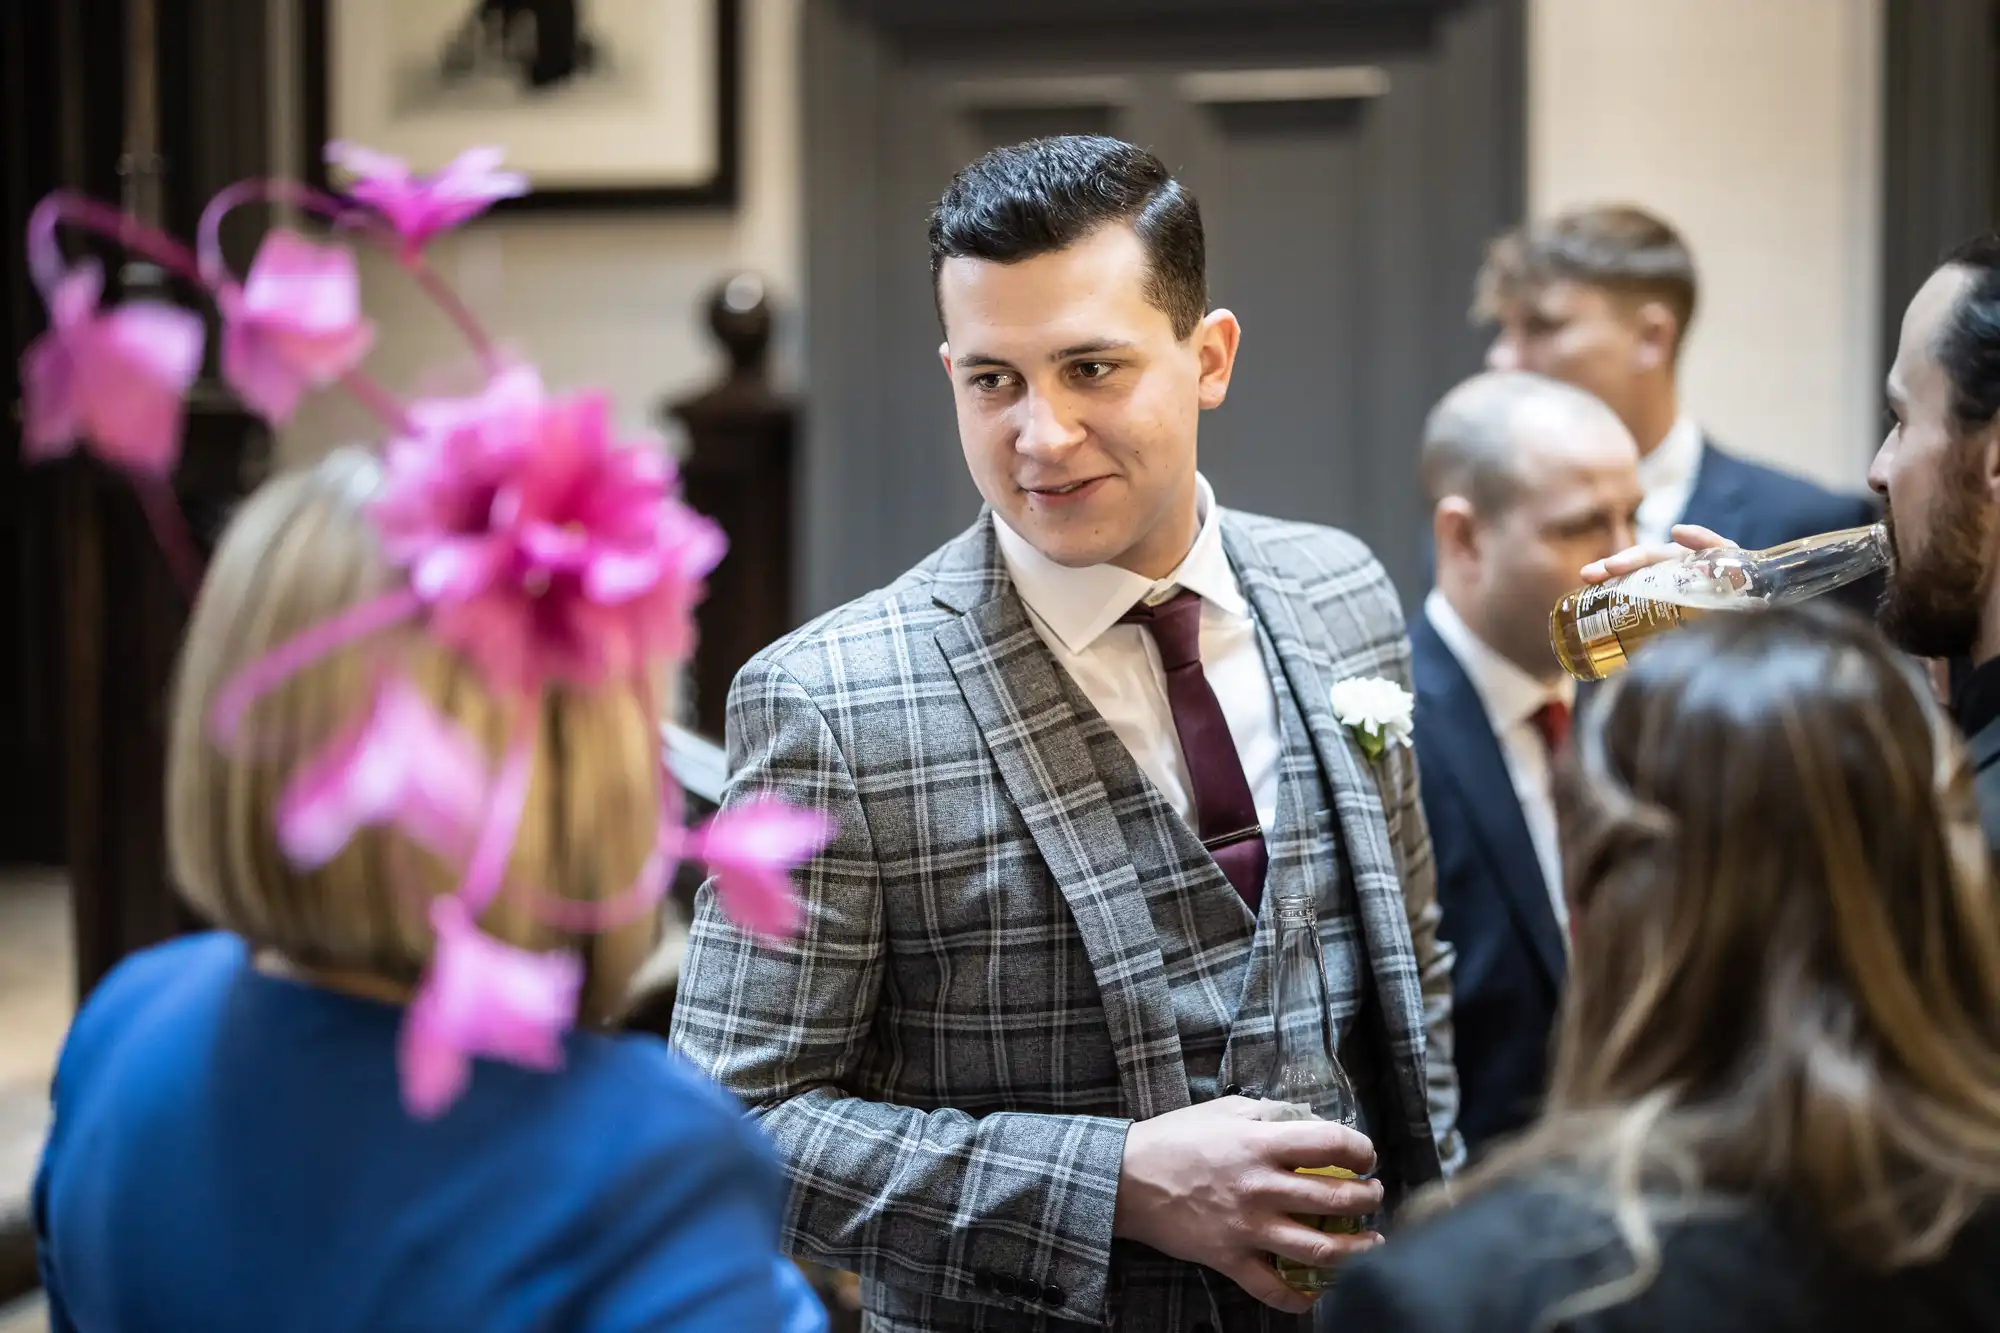 A man in a grey plaid suit and maroon tie holds a drink, conversing with a female guest in a blue dress and pink floral headpiece at a social event. Other guests can be seen in the background.